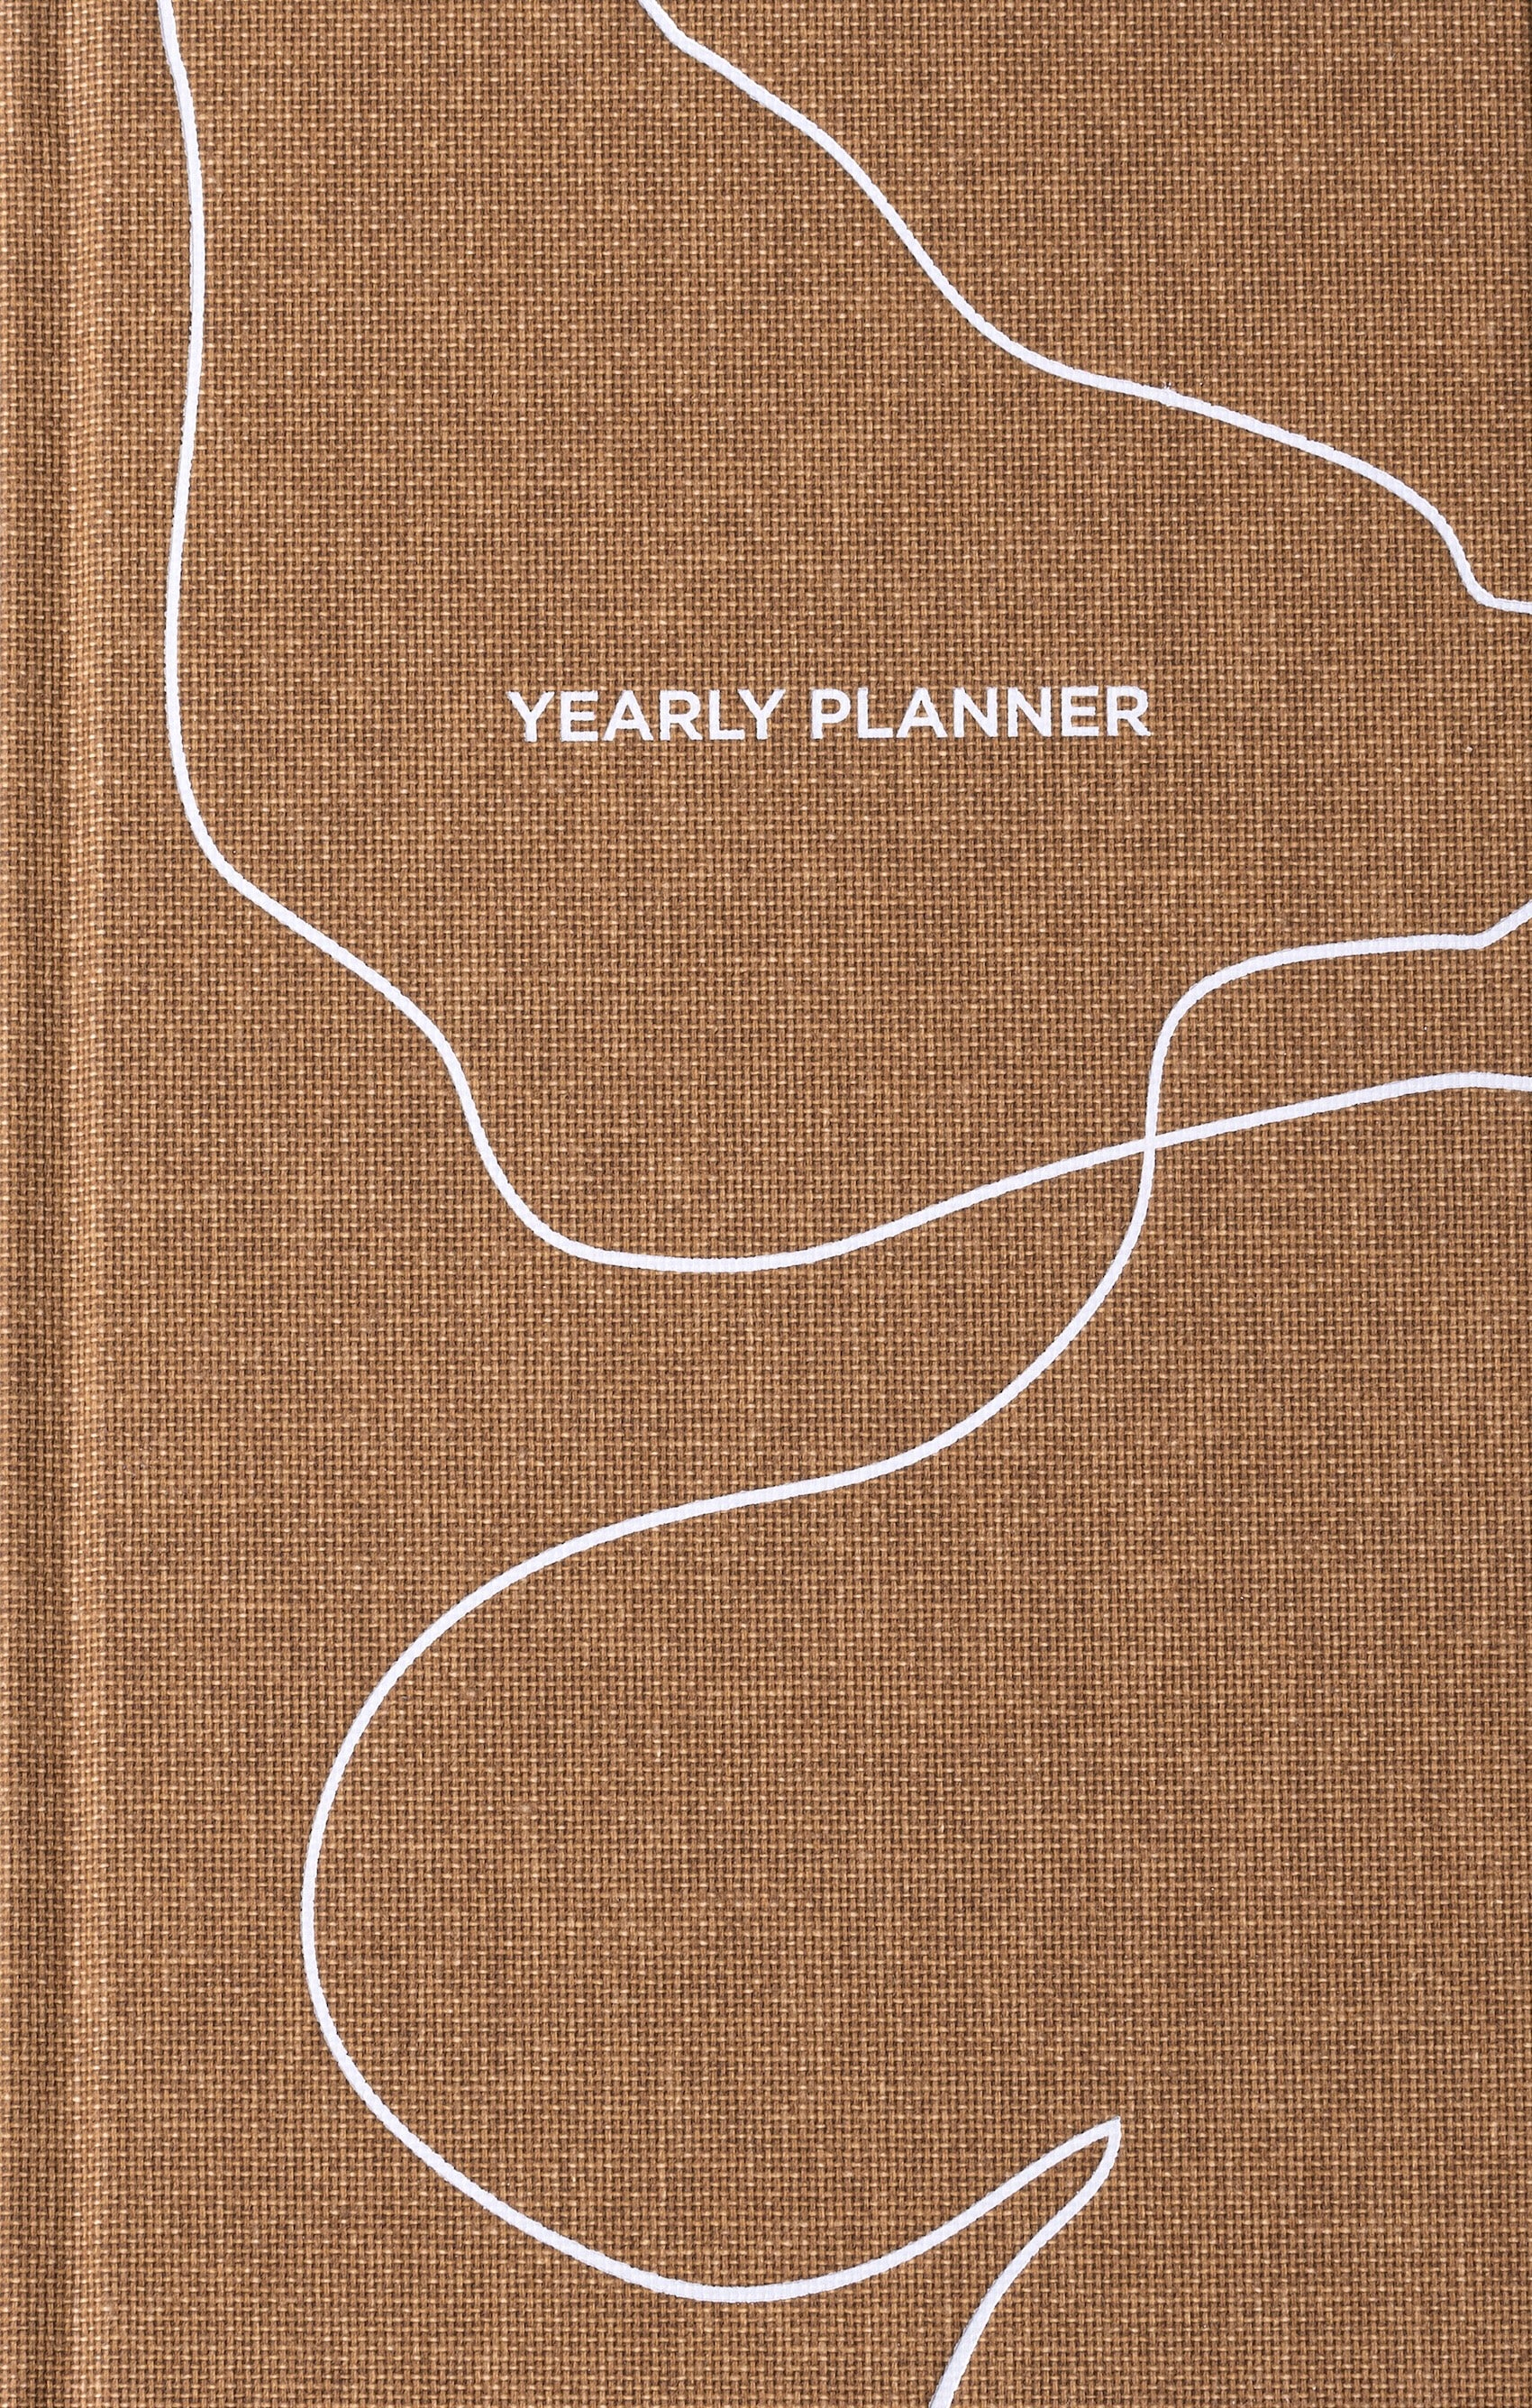 Yearly Planner (Brown)